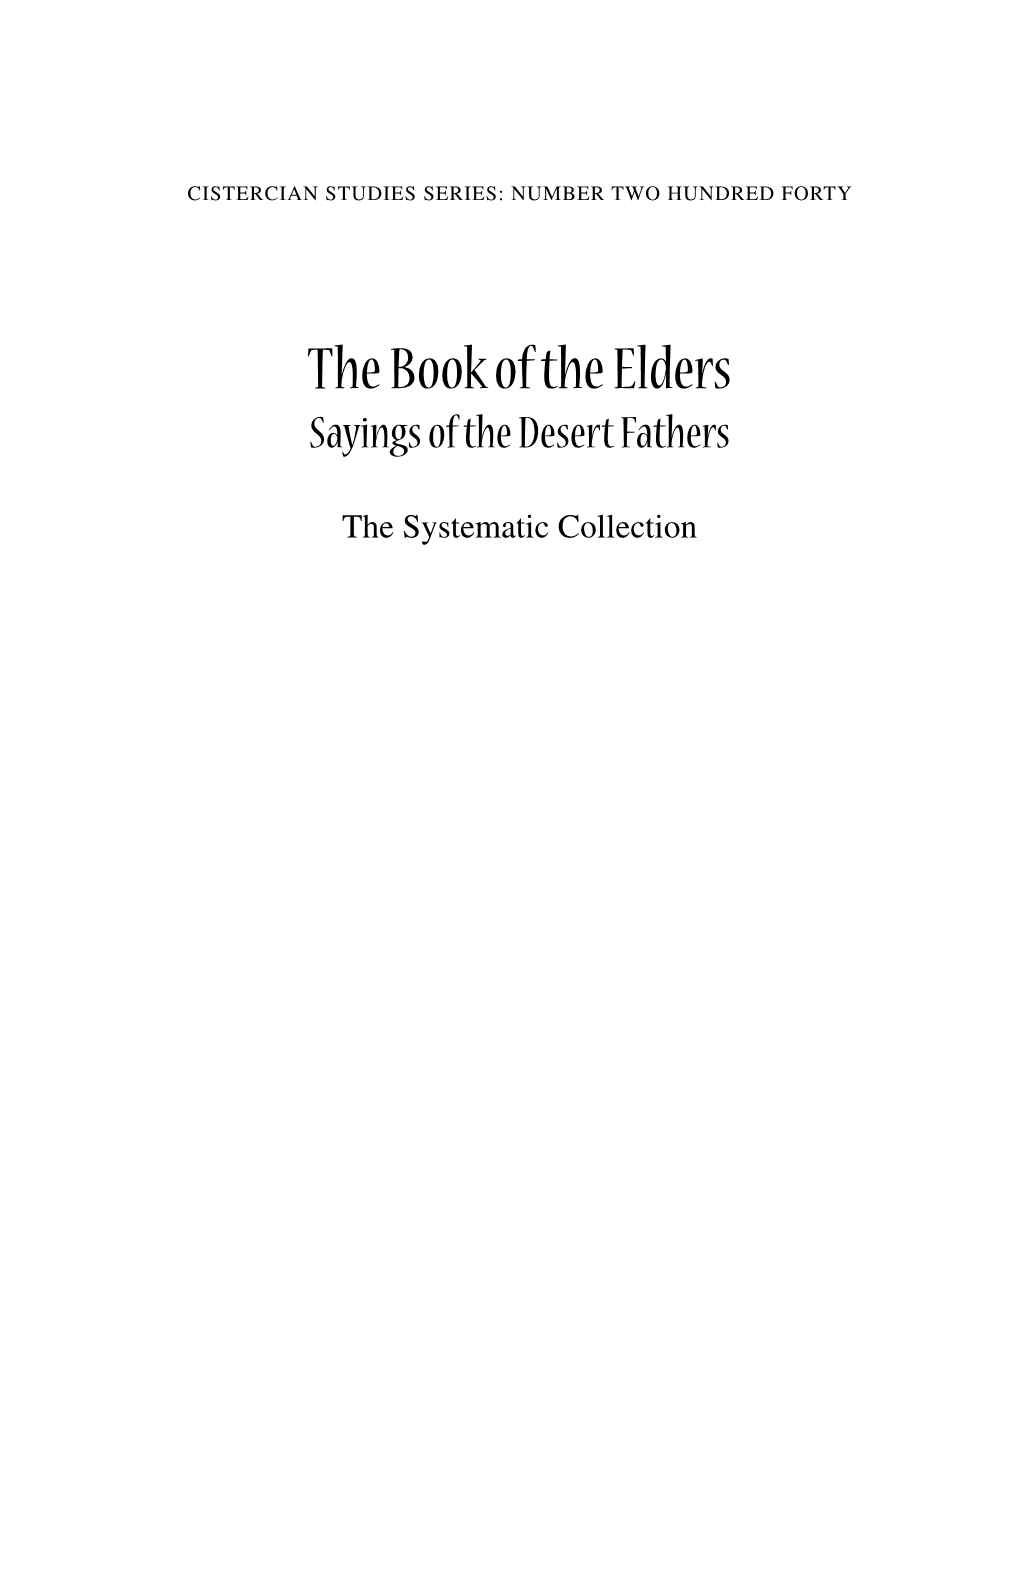 The Book of the Elders Sayings of the Desert Fathers